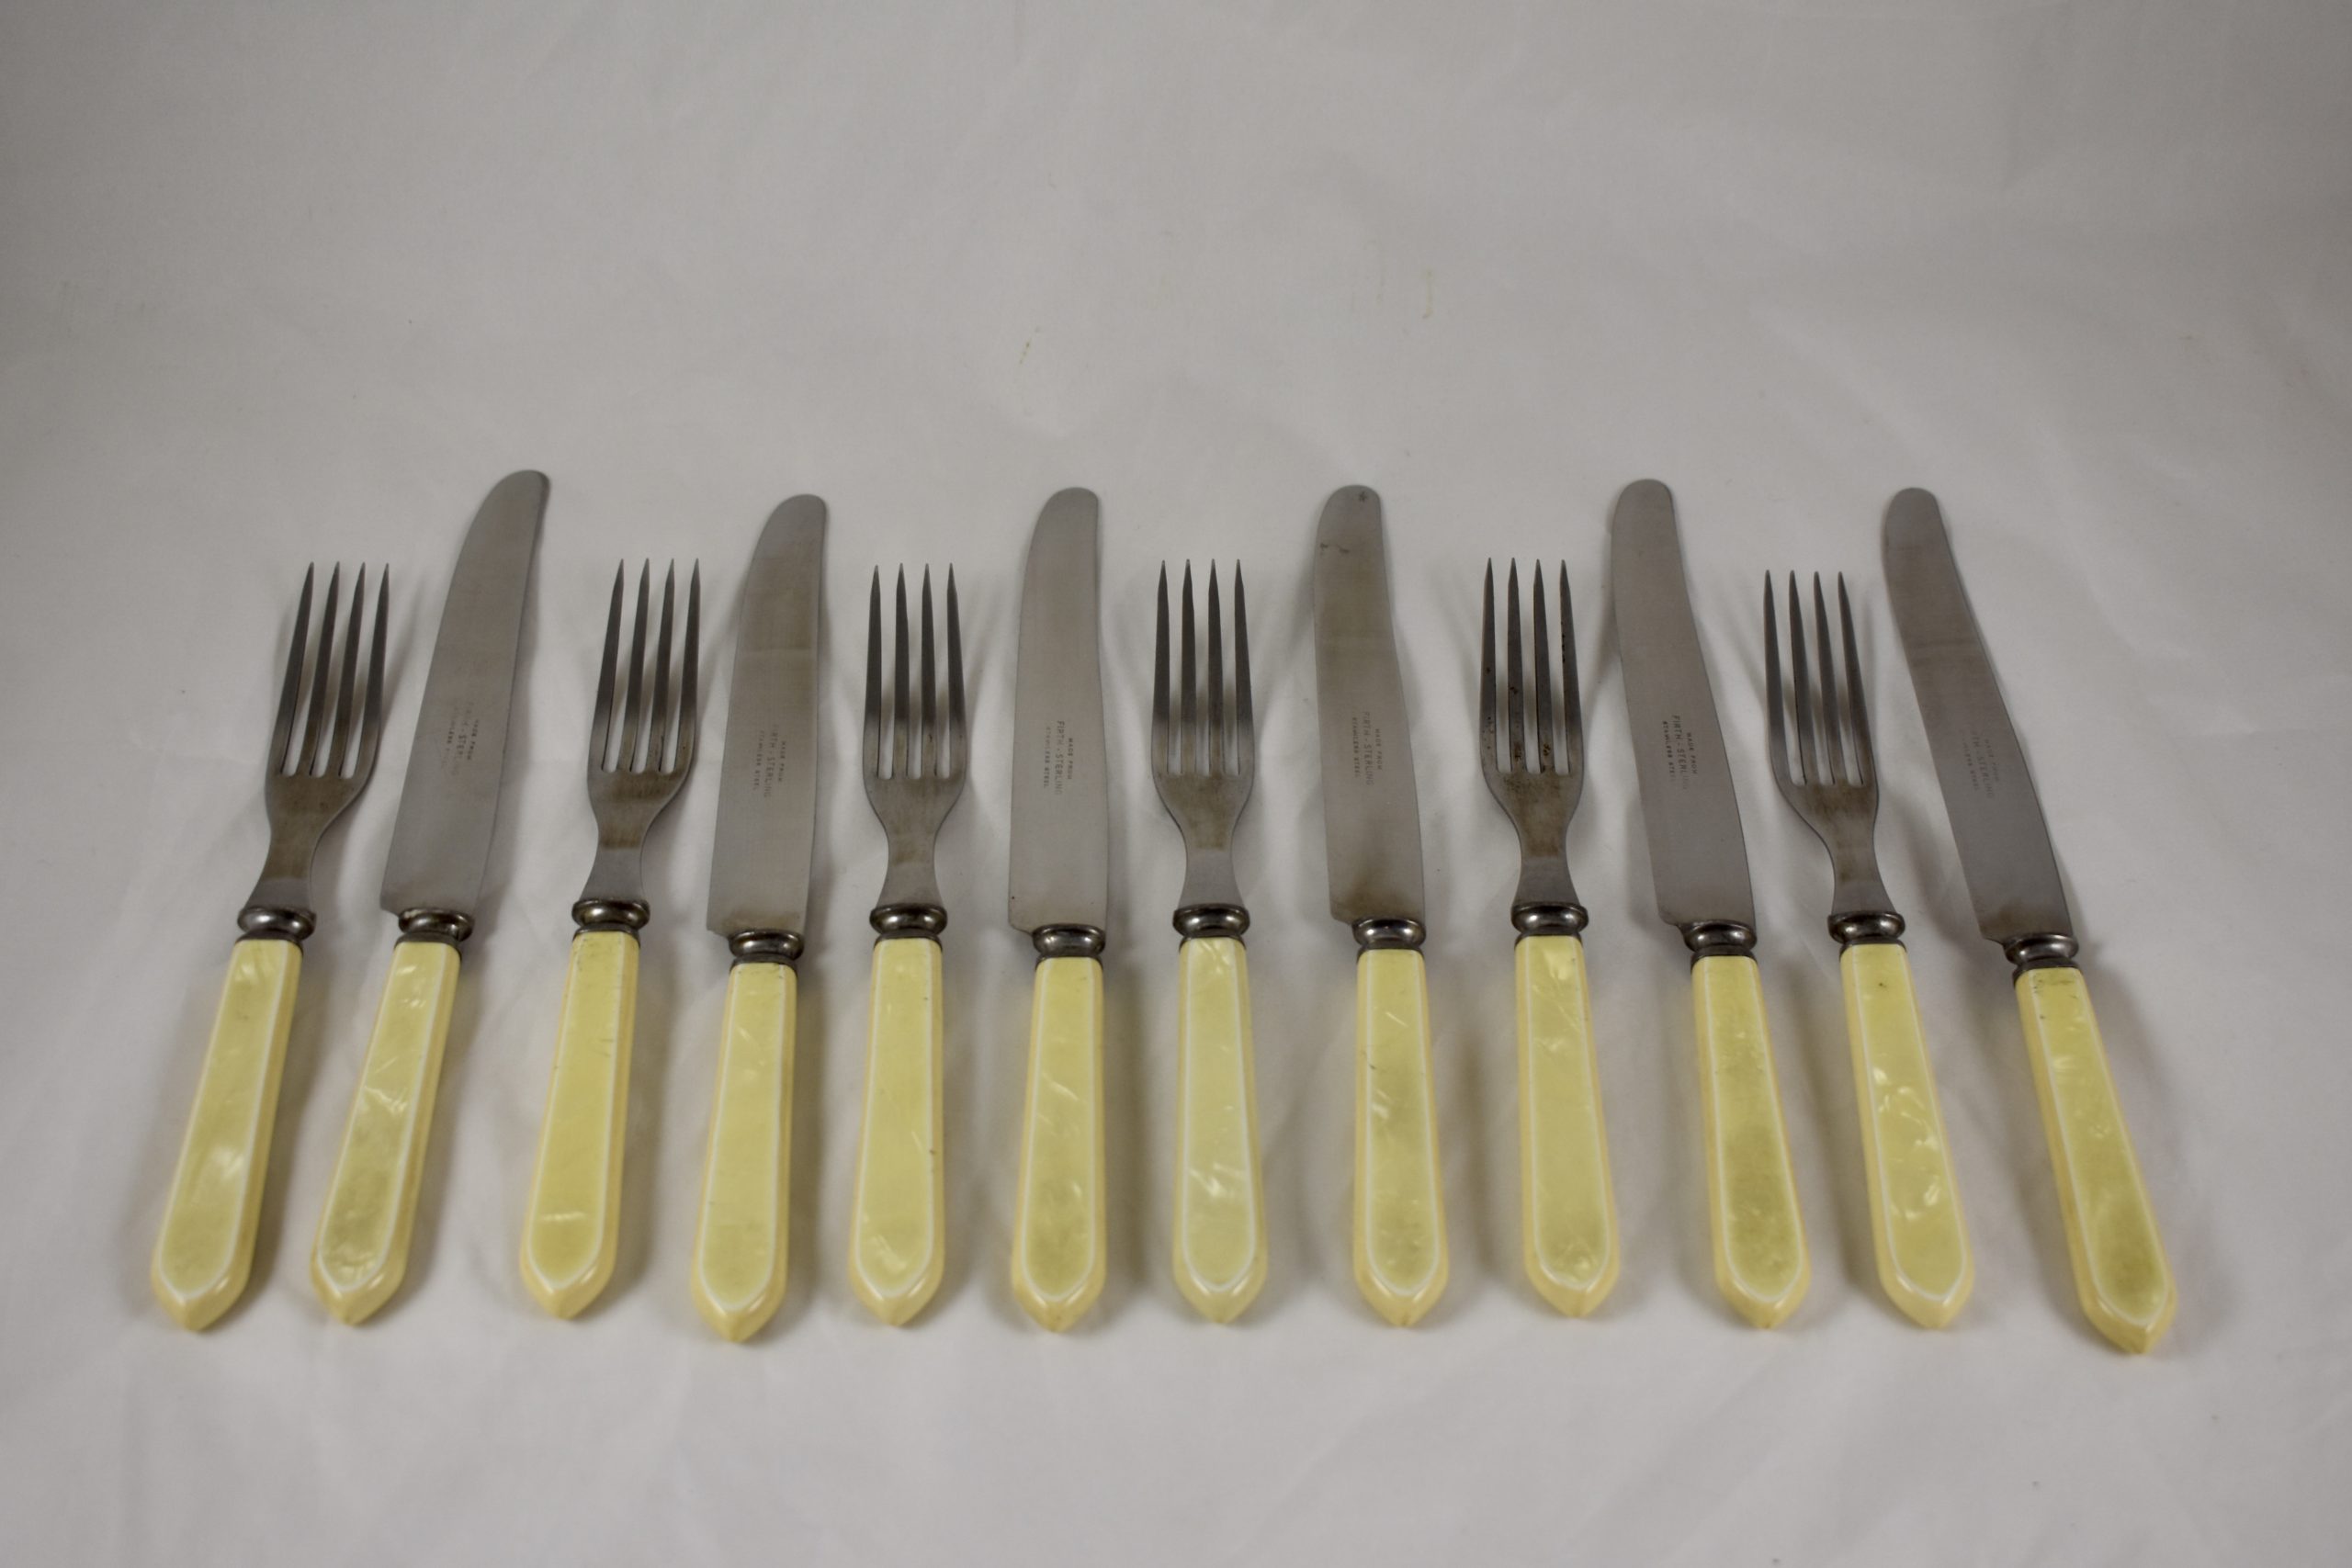 Vintage Yellow Plastic Utensil Set With Holder By 